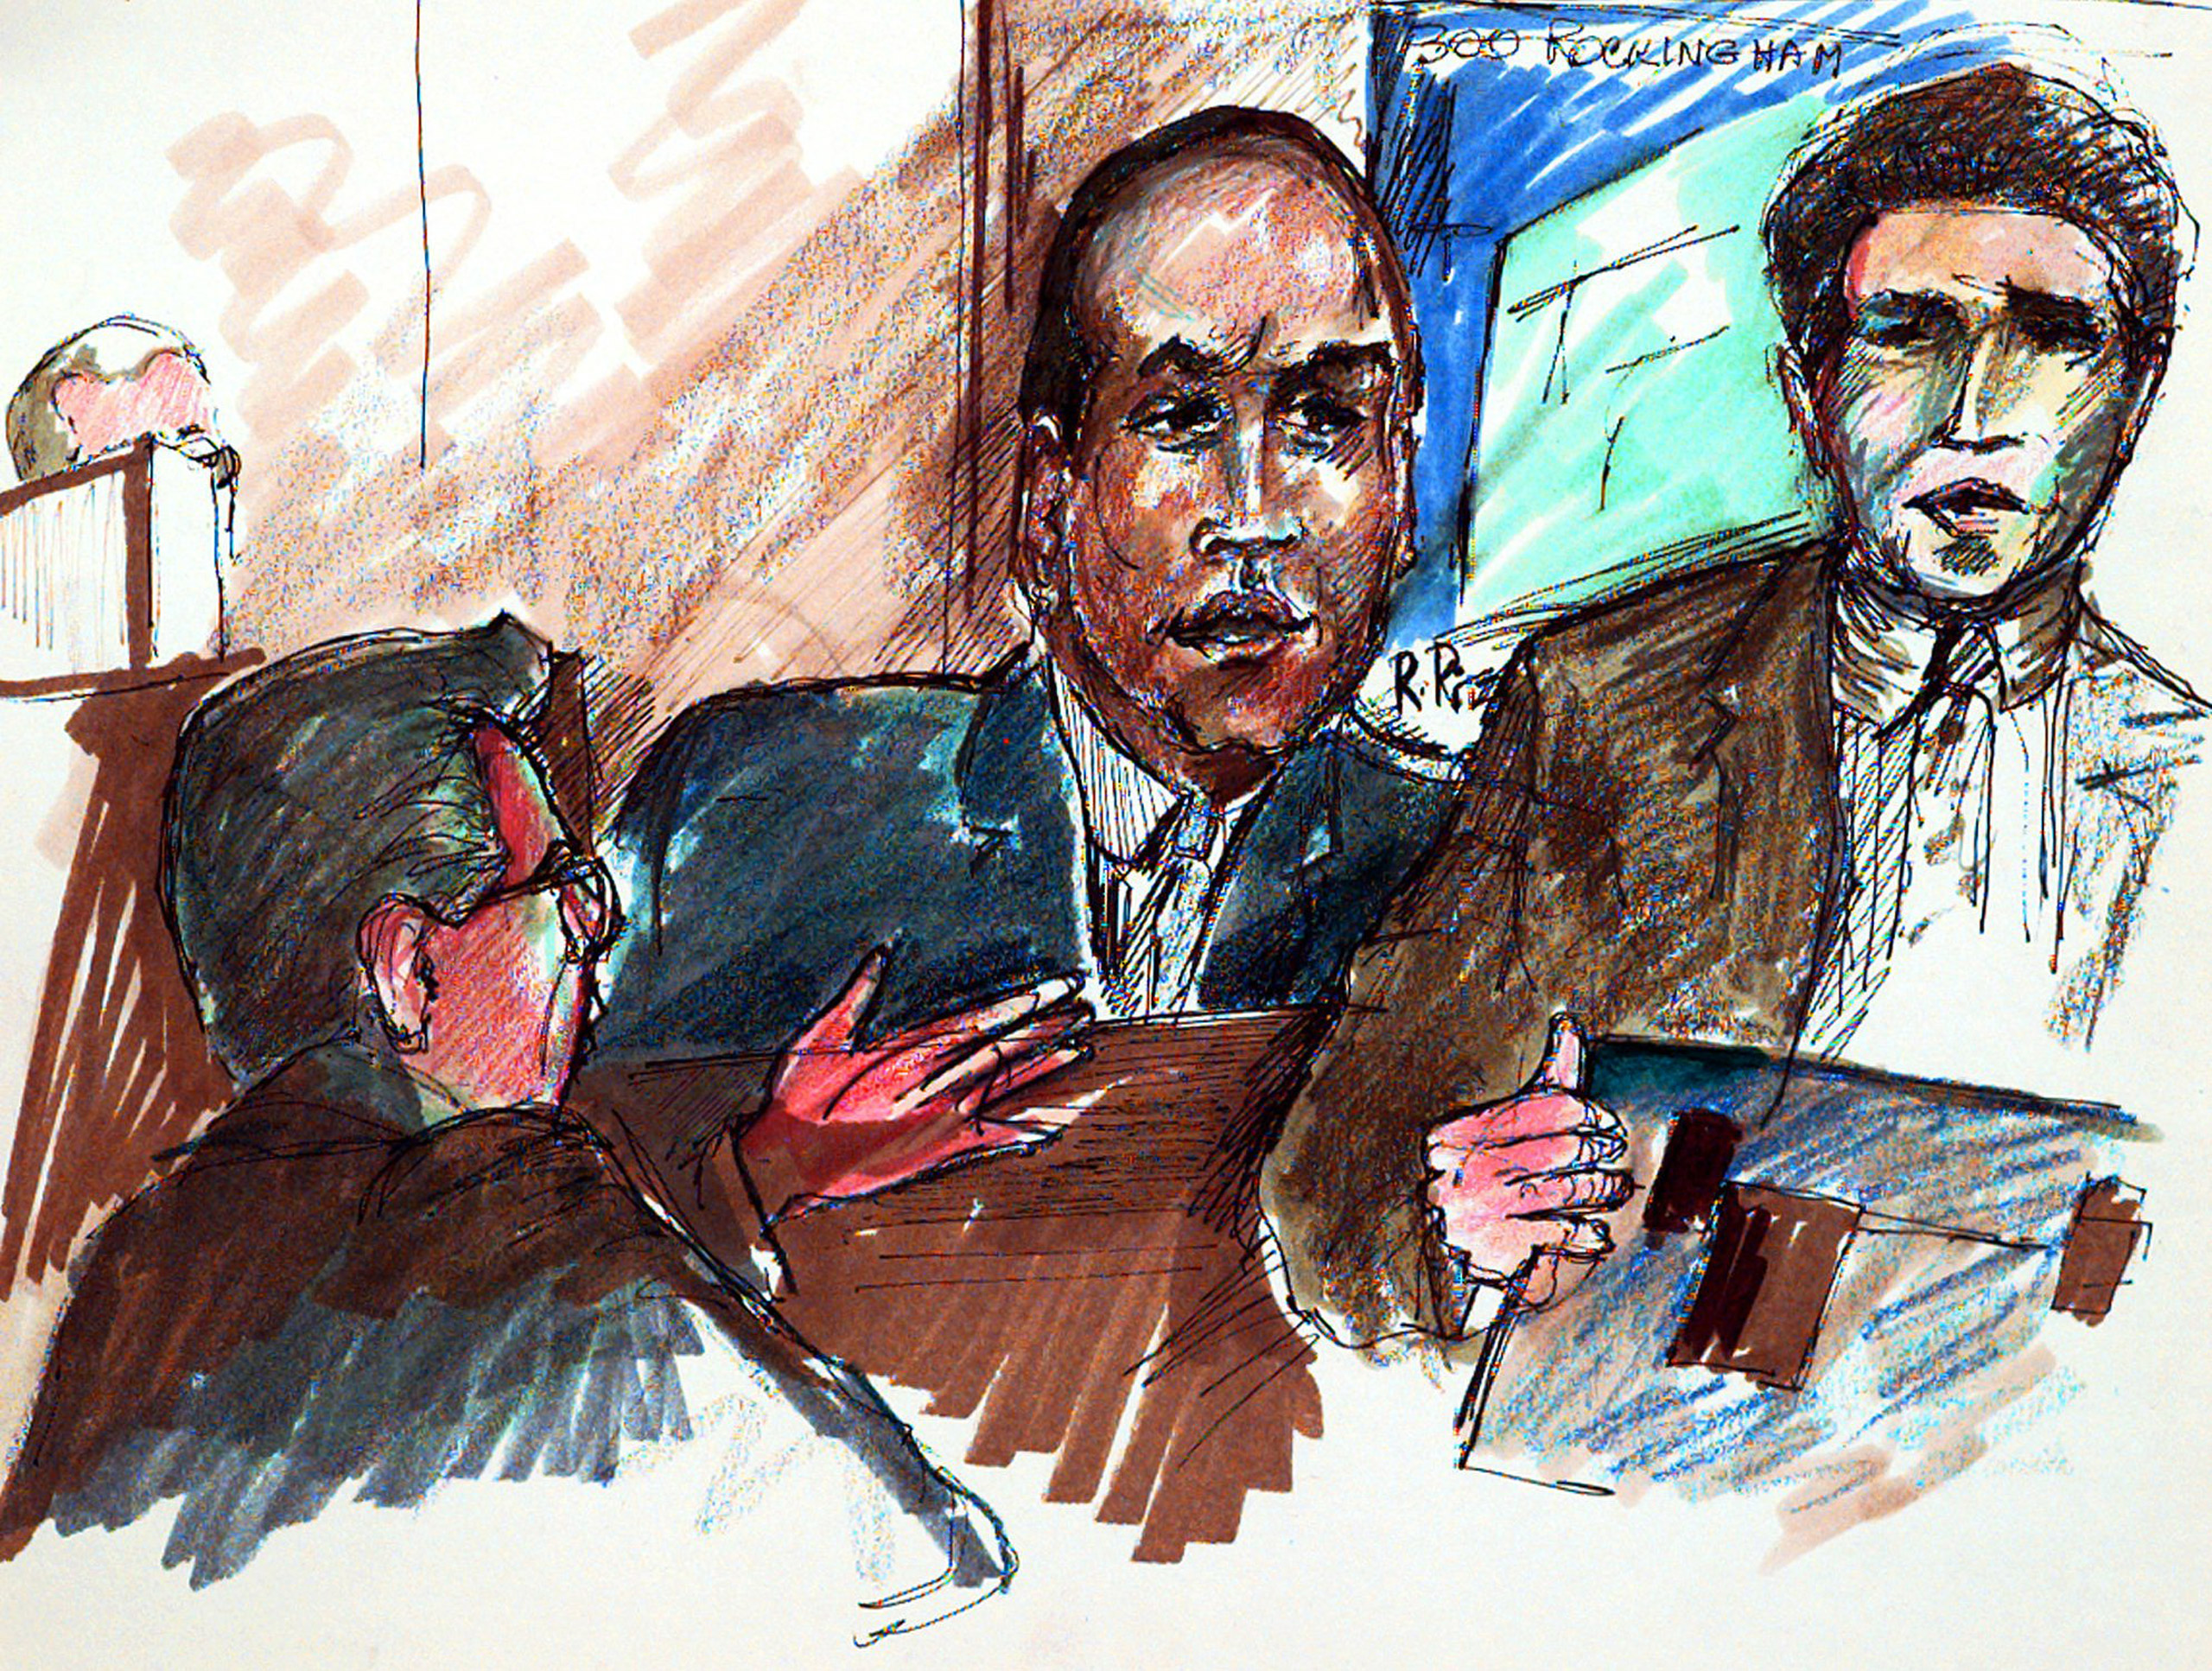 O.J. Simpson is questioned by plaintiff's attorney Daniel Petrocelli (right) about Simpson's missing bag as defense attorney Robert Baker objects in Los Angeles County Superior court in Santa Monica, Calif., on Nov. 25, 1996. Simpson was acquitted after a trial that lasted more than eight months.